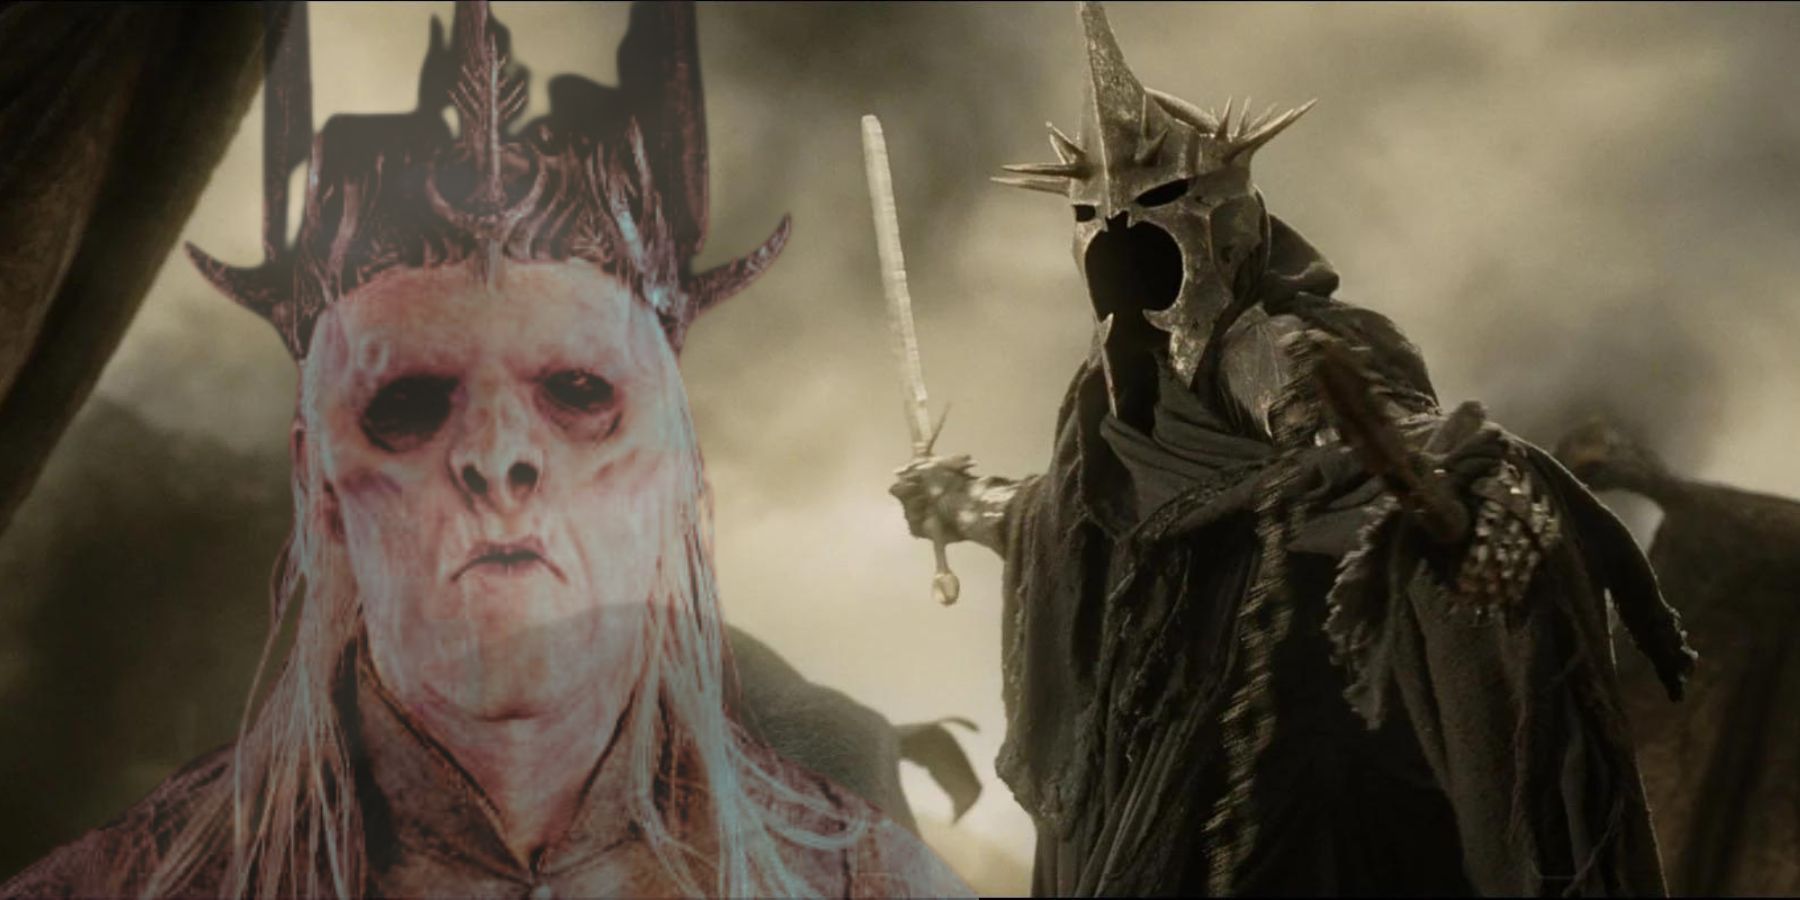 witch-king-of-angmar-lord-of-the-nazgul-ringwraiths-feature-undead-king-lotr-lord-of-the-rings